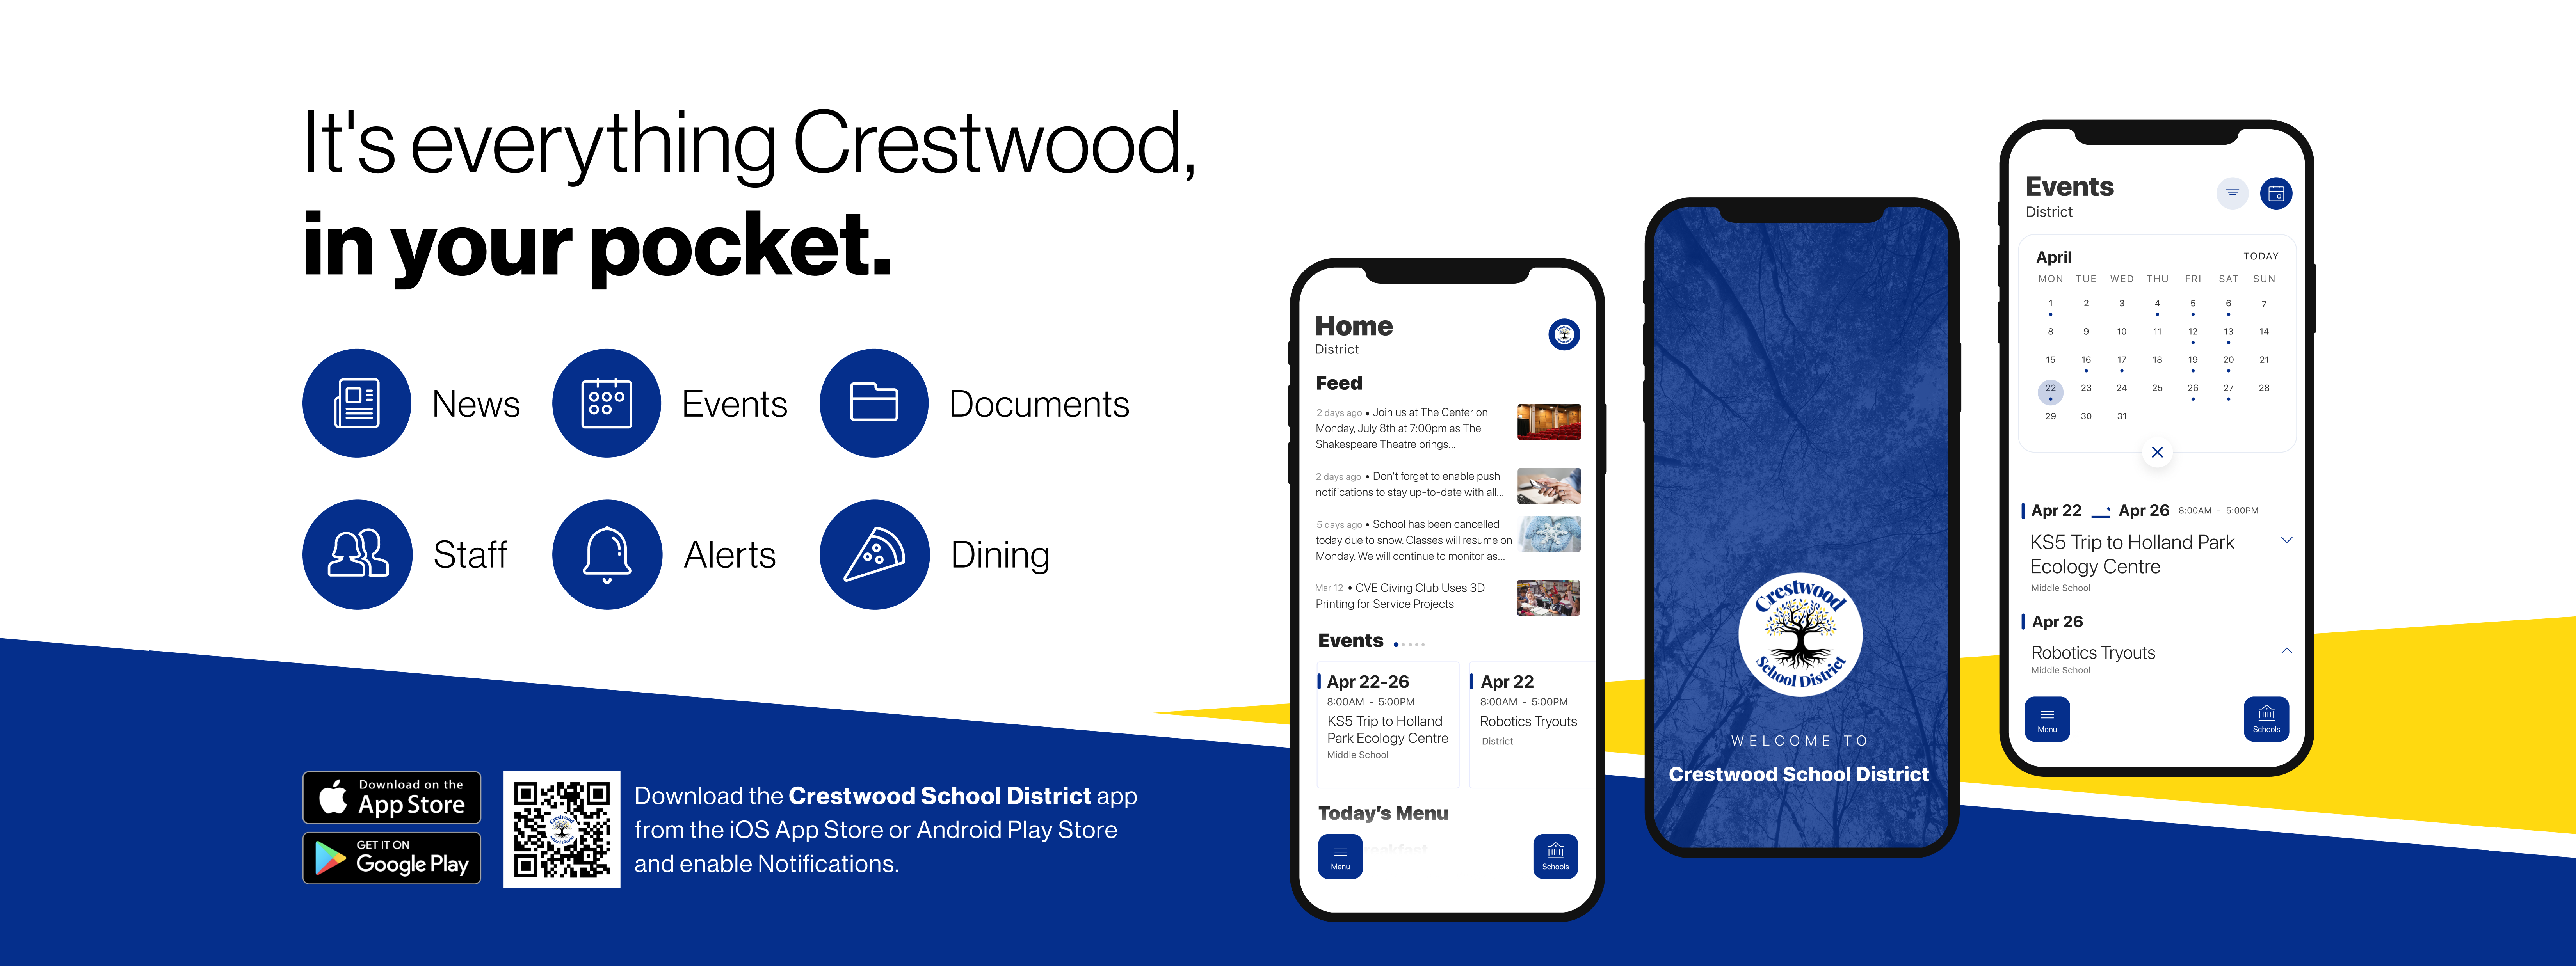 Introducing the Crestwood School District Mobile App! it's everything Crestwood, in your pocket! Download the Crestwood School District App from the I O S App Store, or the Android Play Store, and enable notifications.